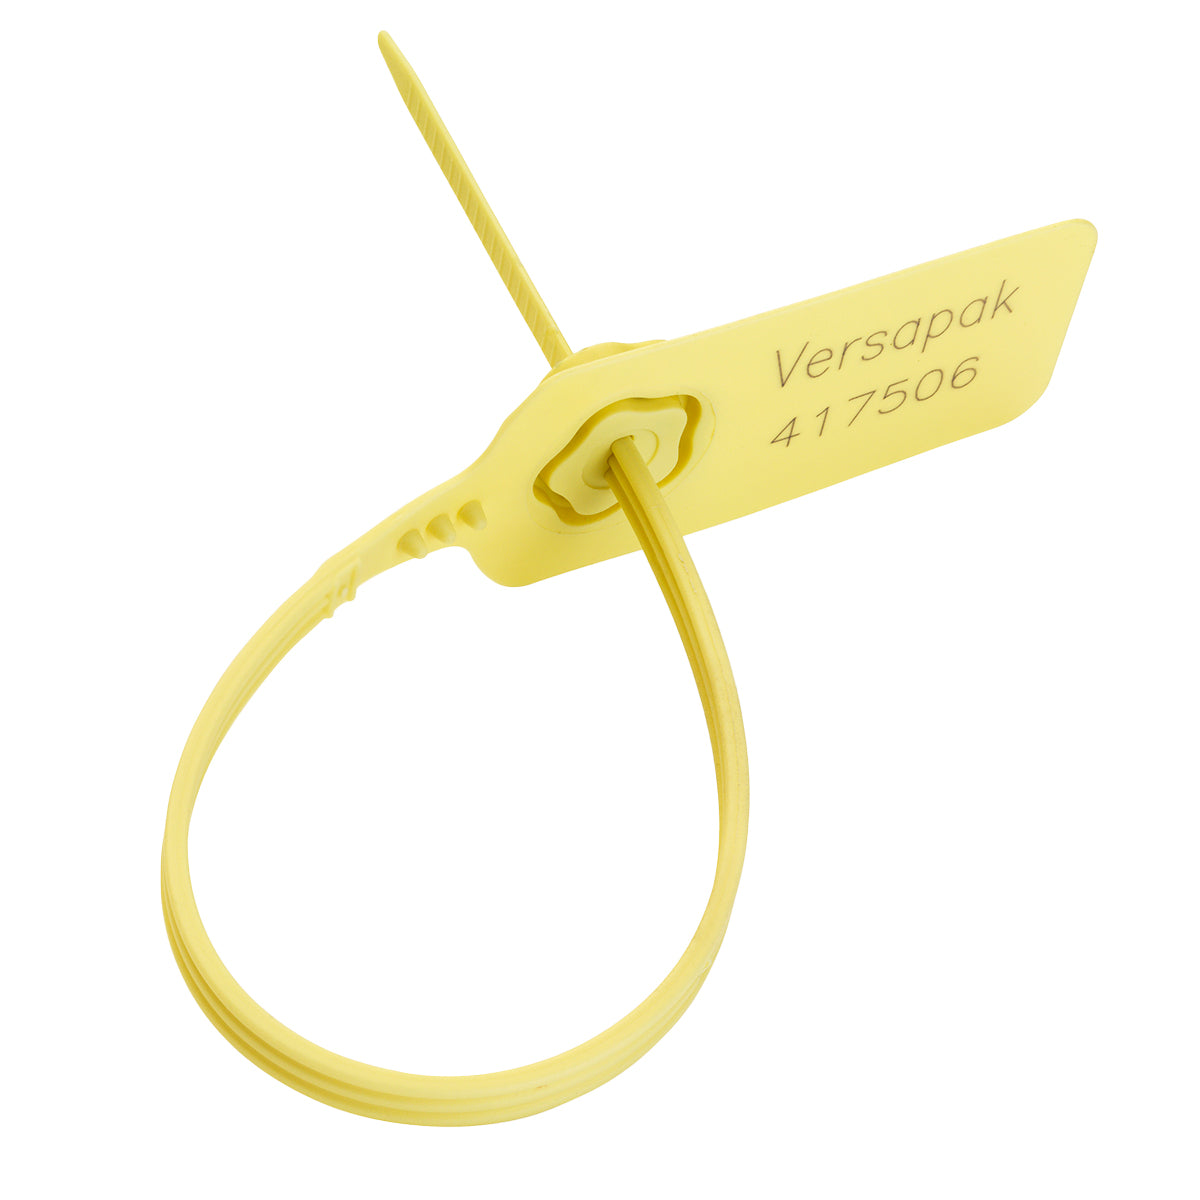 VersaLock - Variable Length Security Seal (Yellow)